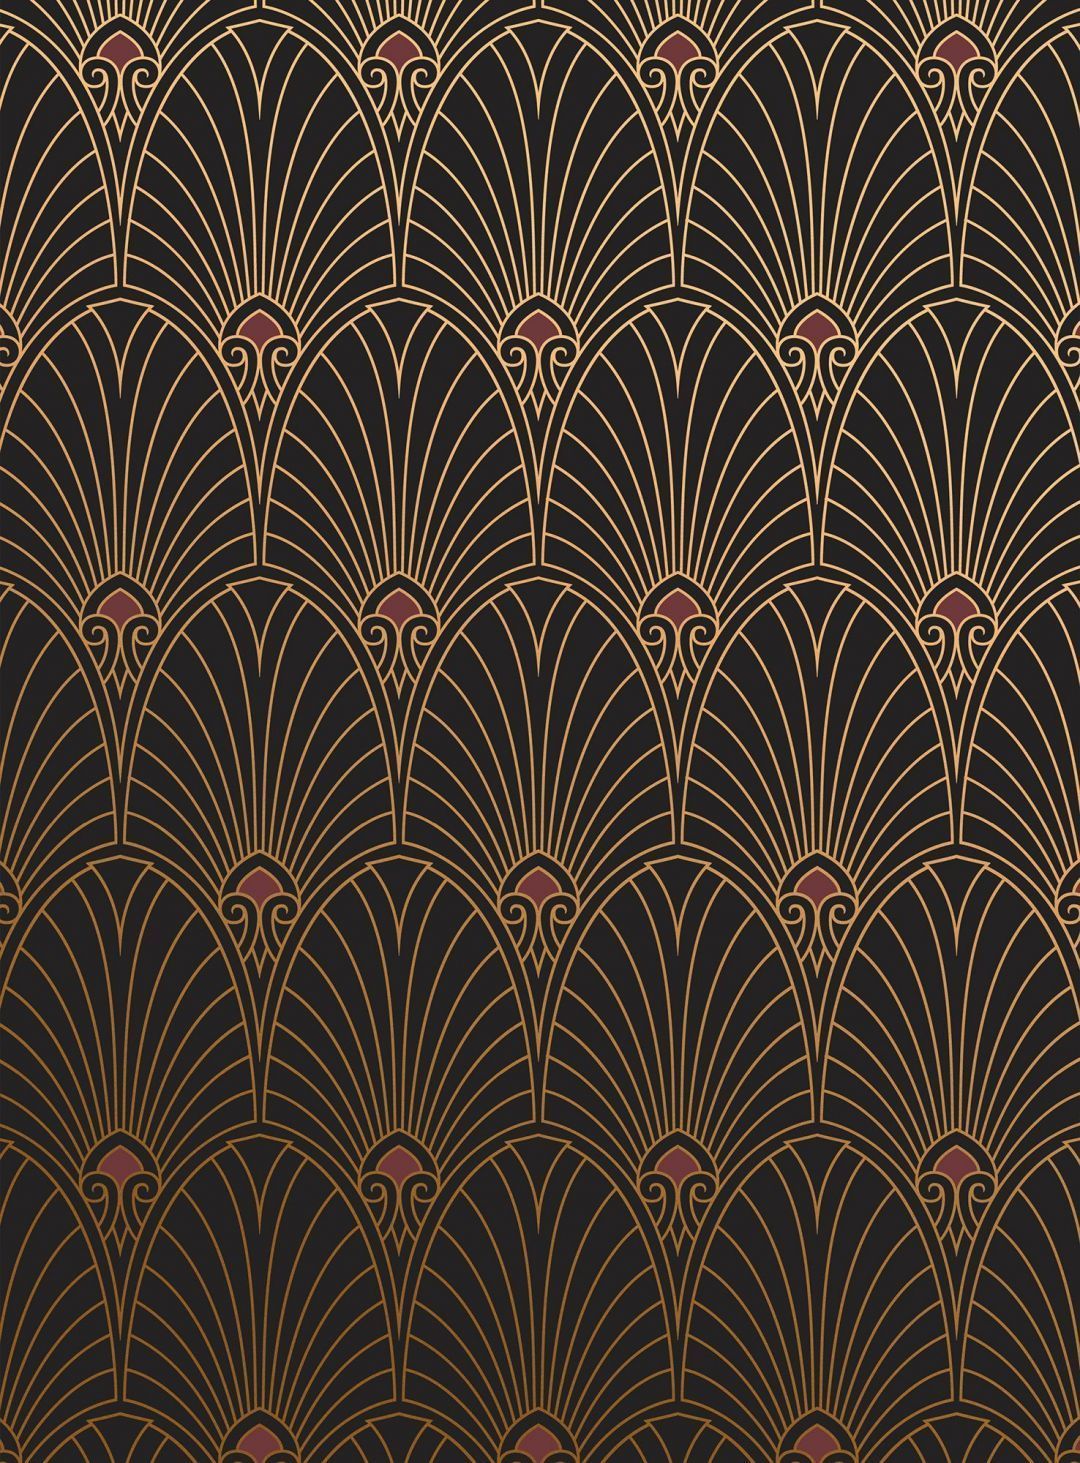 3D / Abstract Image, HD Photo (1080p), Wallpaper (Android/ iPhone) (2020). Art deco wallpaper, 1920s art deco, Art deco